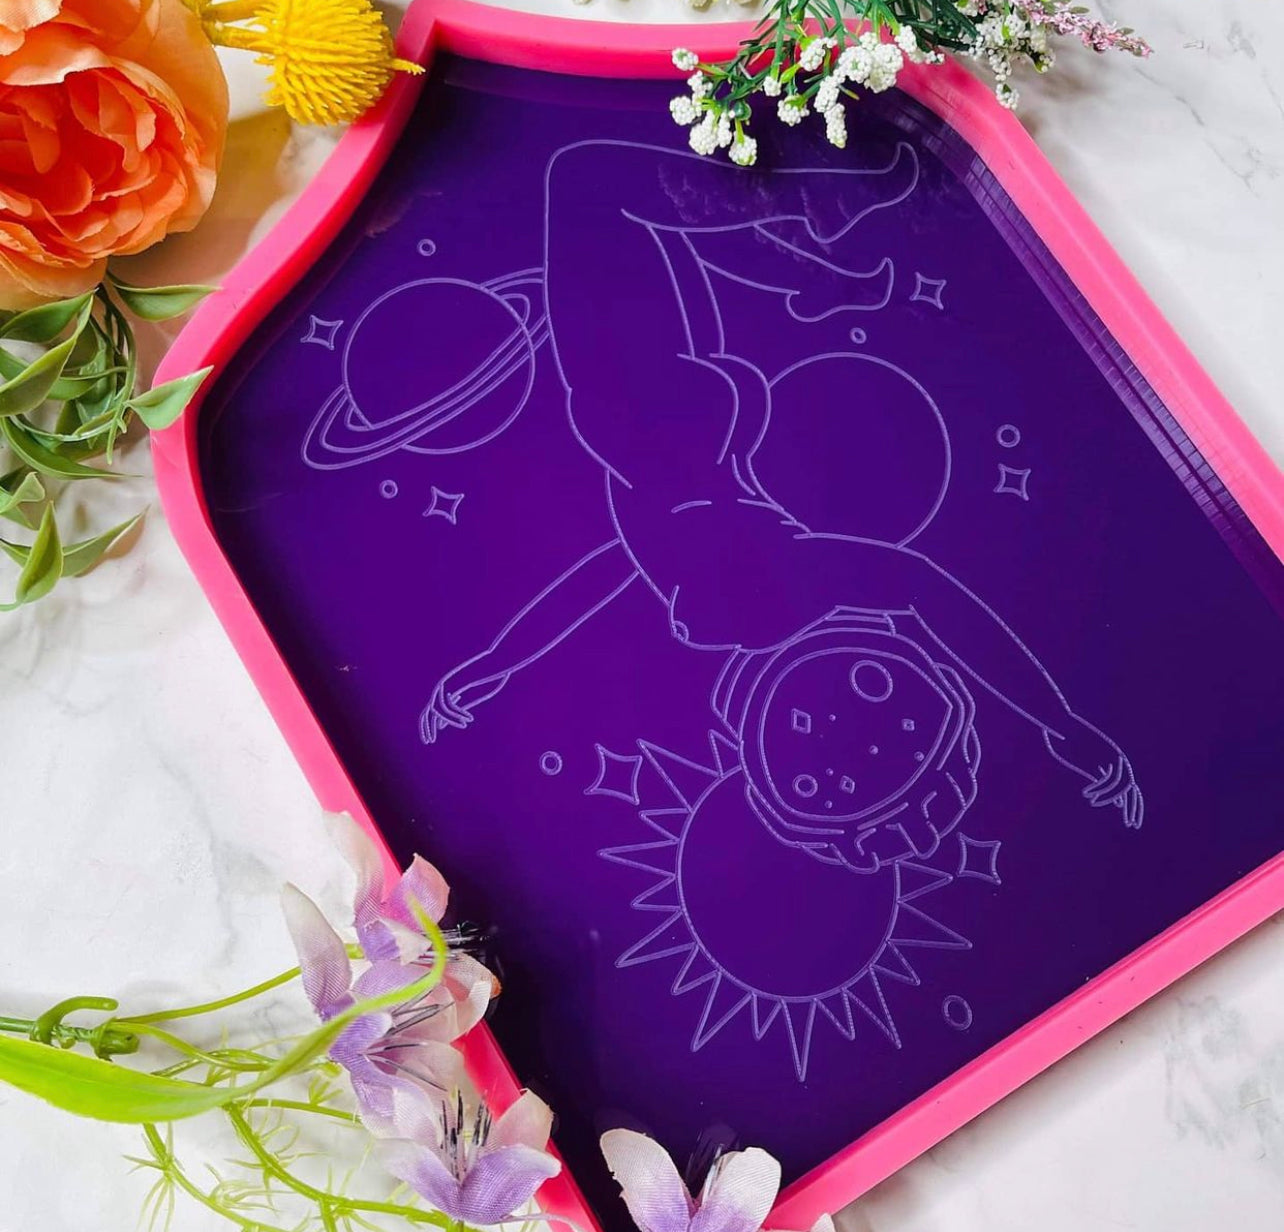 Space babe tray silicone mold